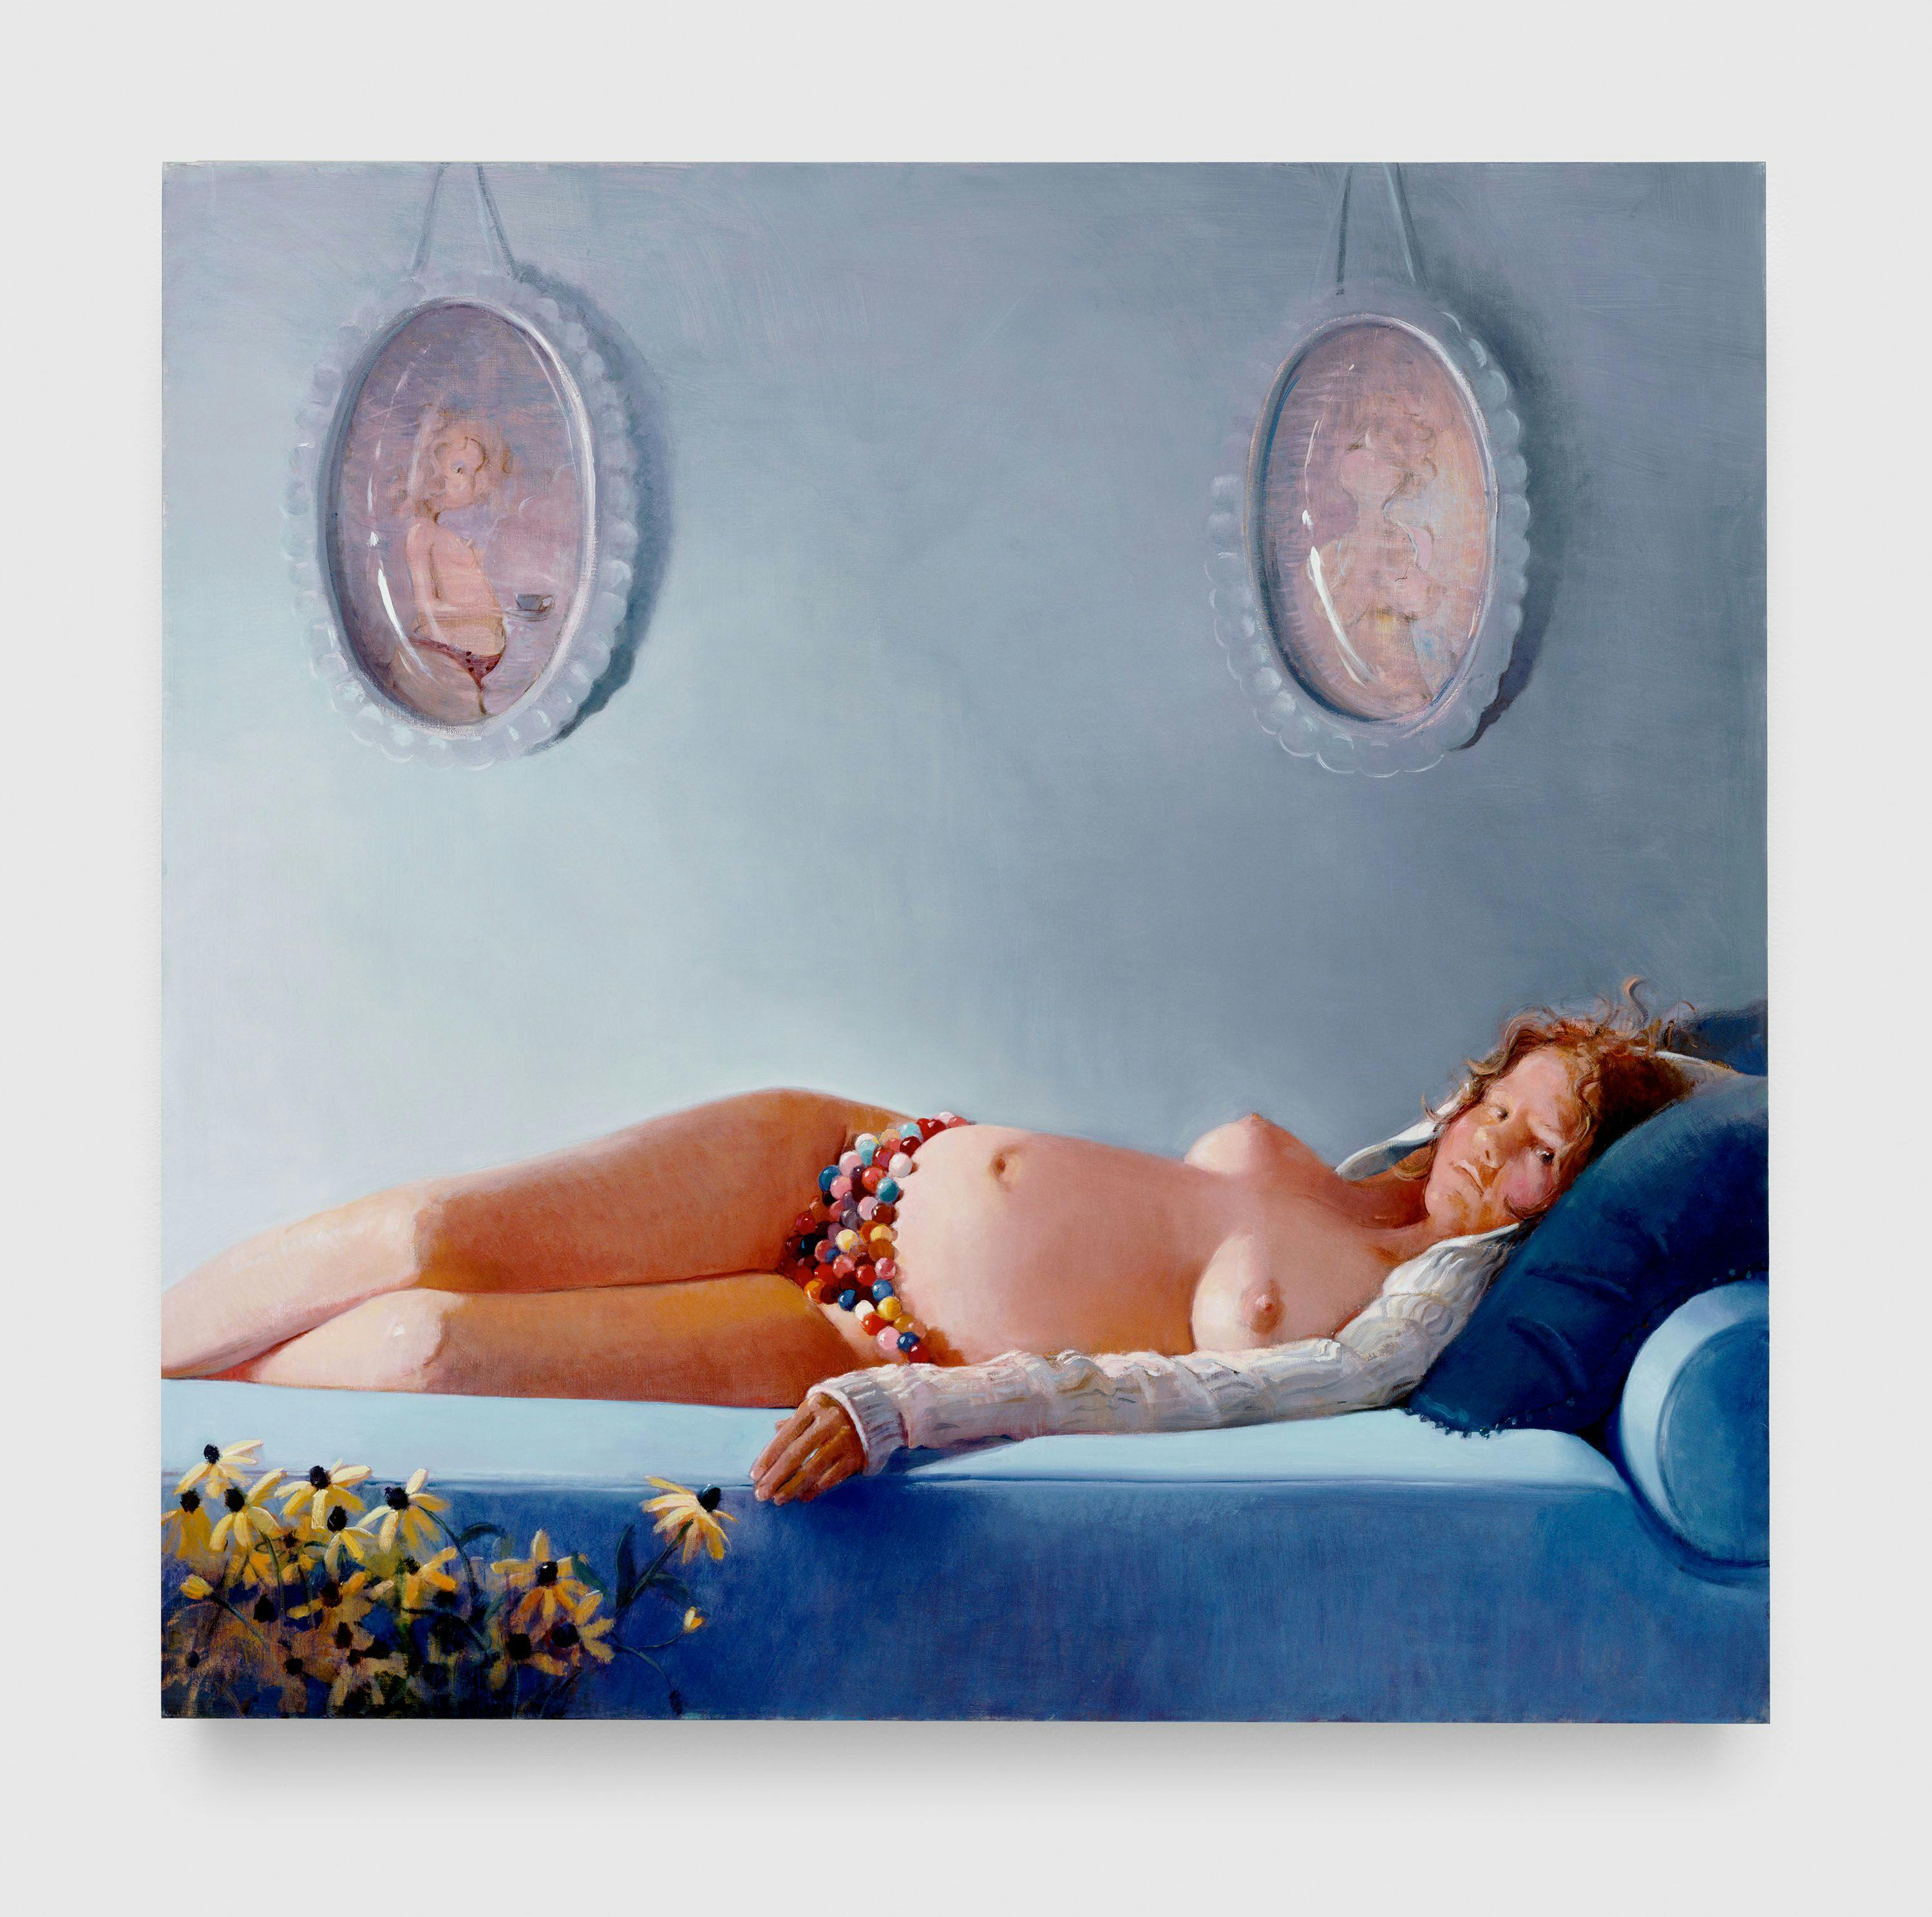 A painting by Lisa Yuskavage, titled Couch, dated 2003.